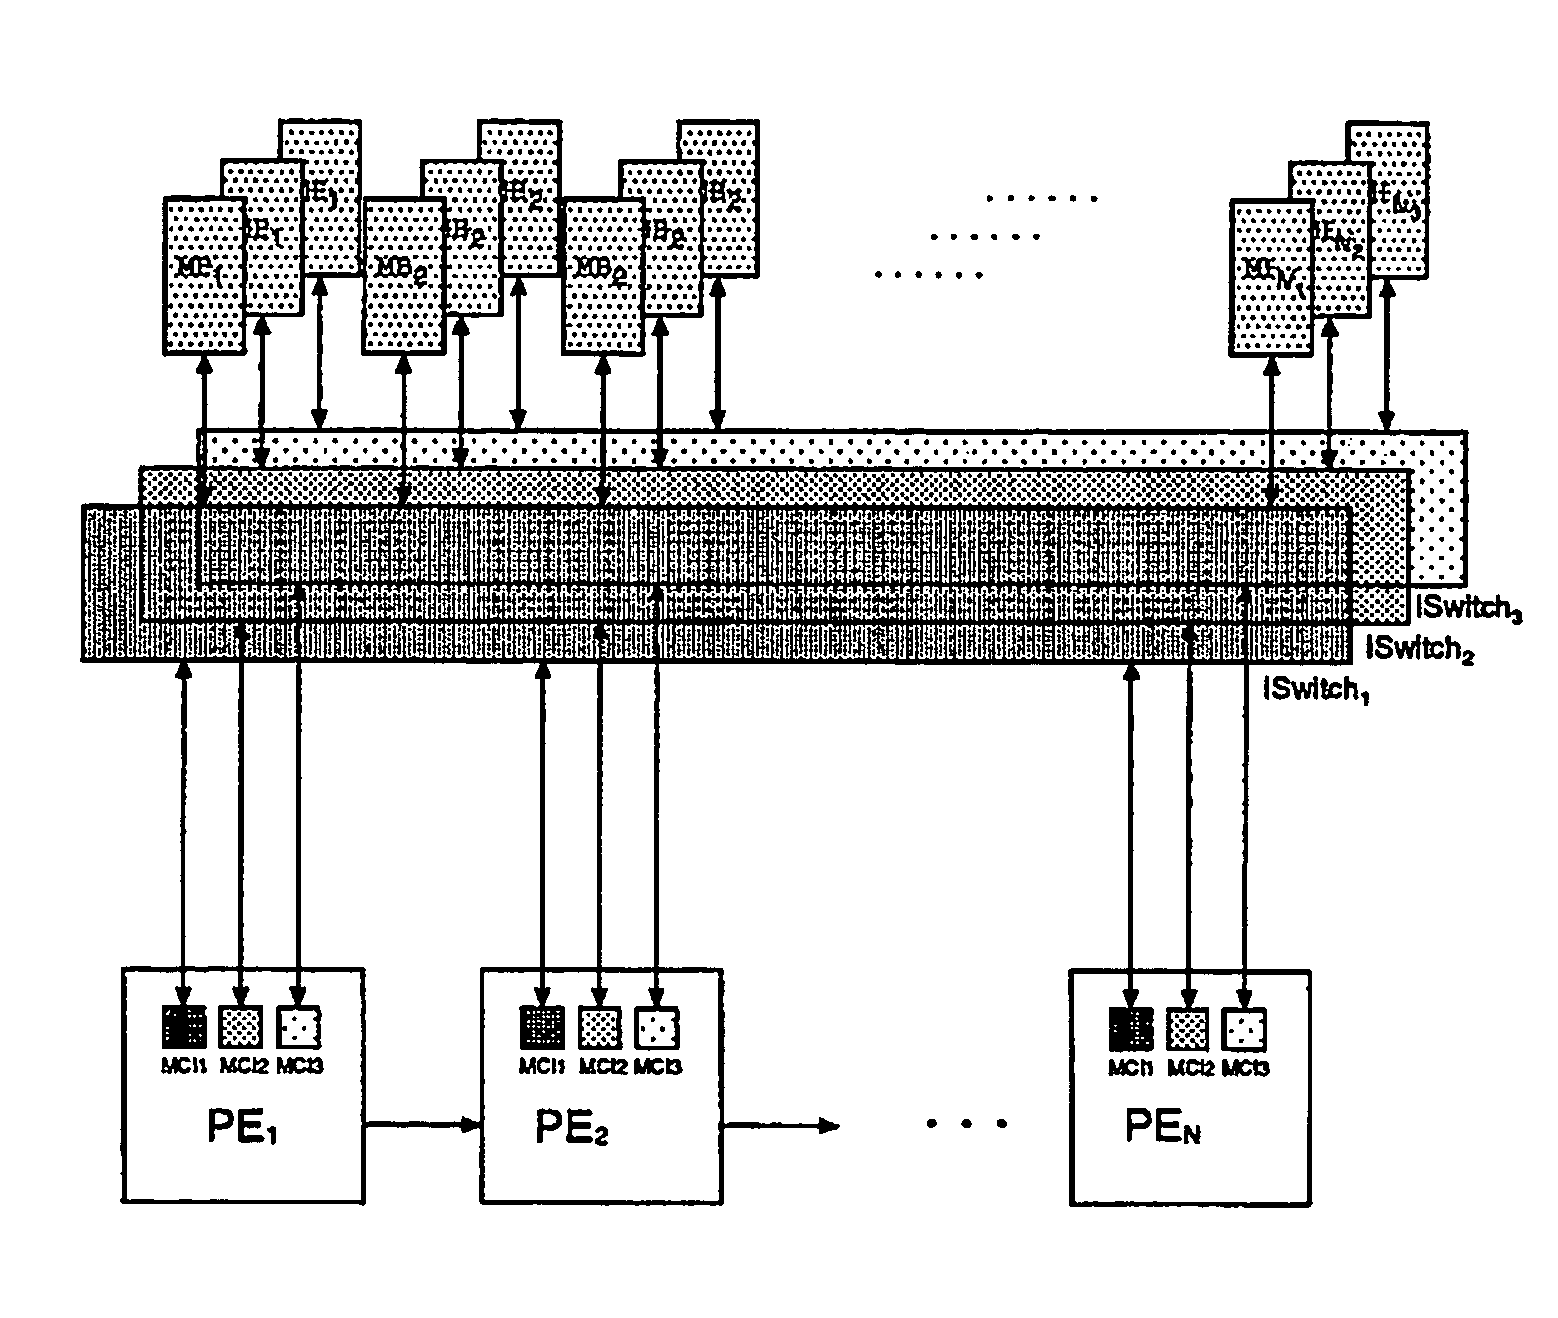 Switch memory architectures